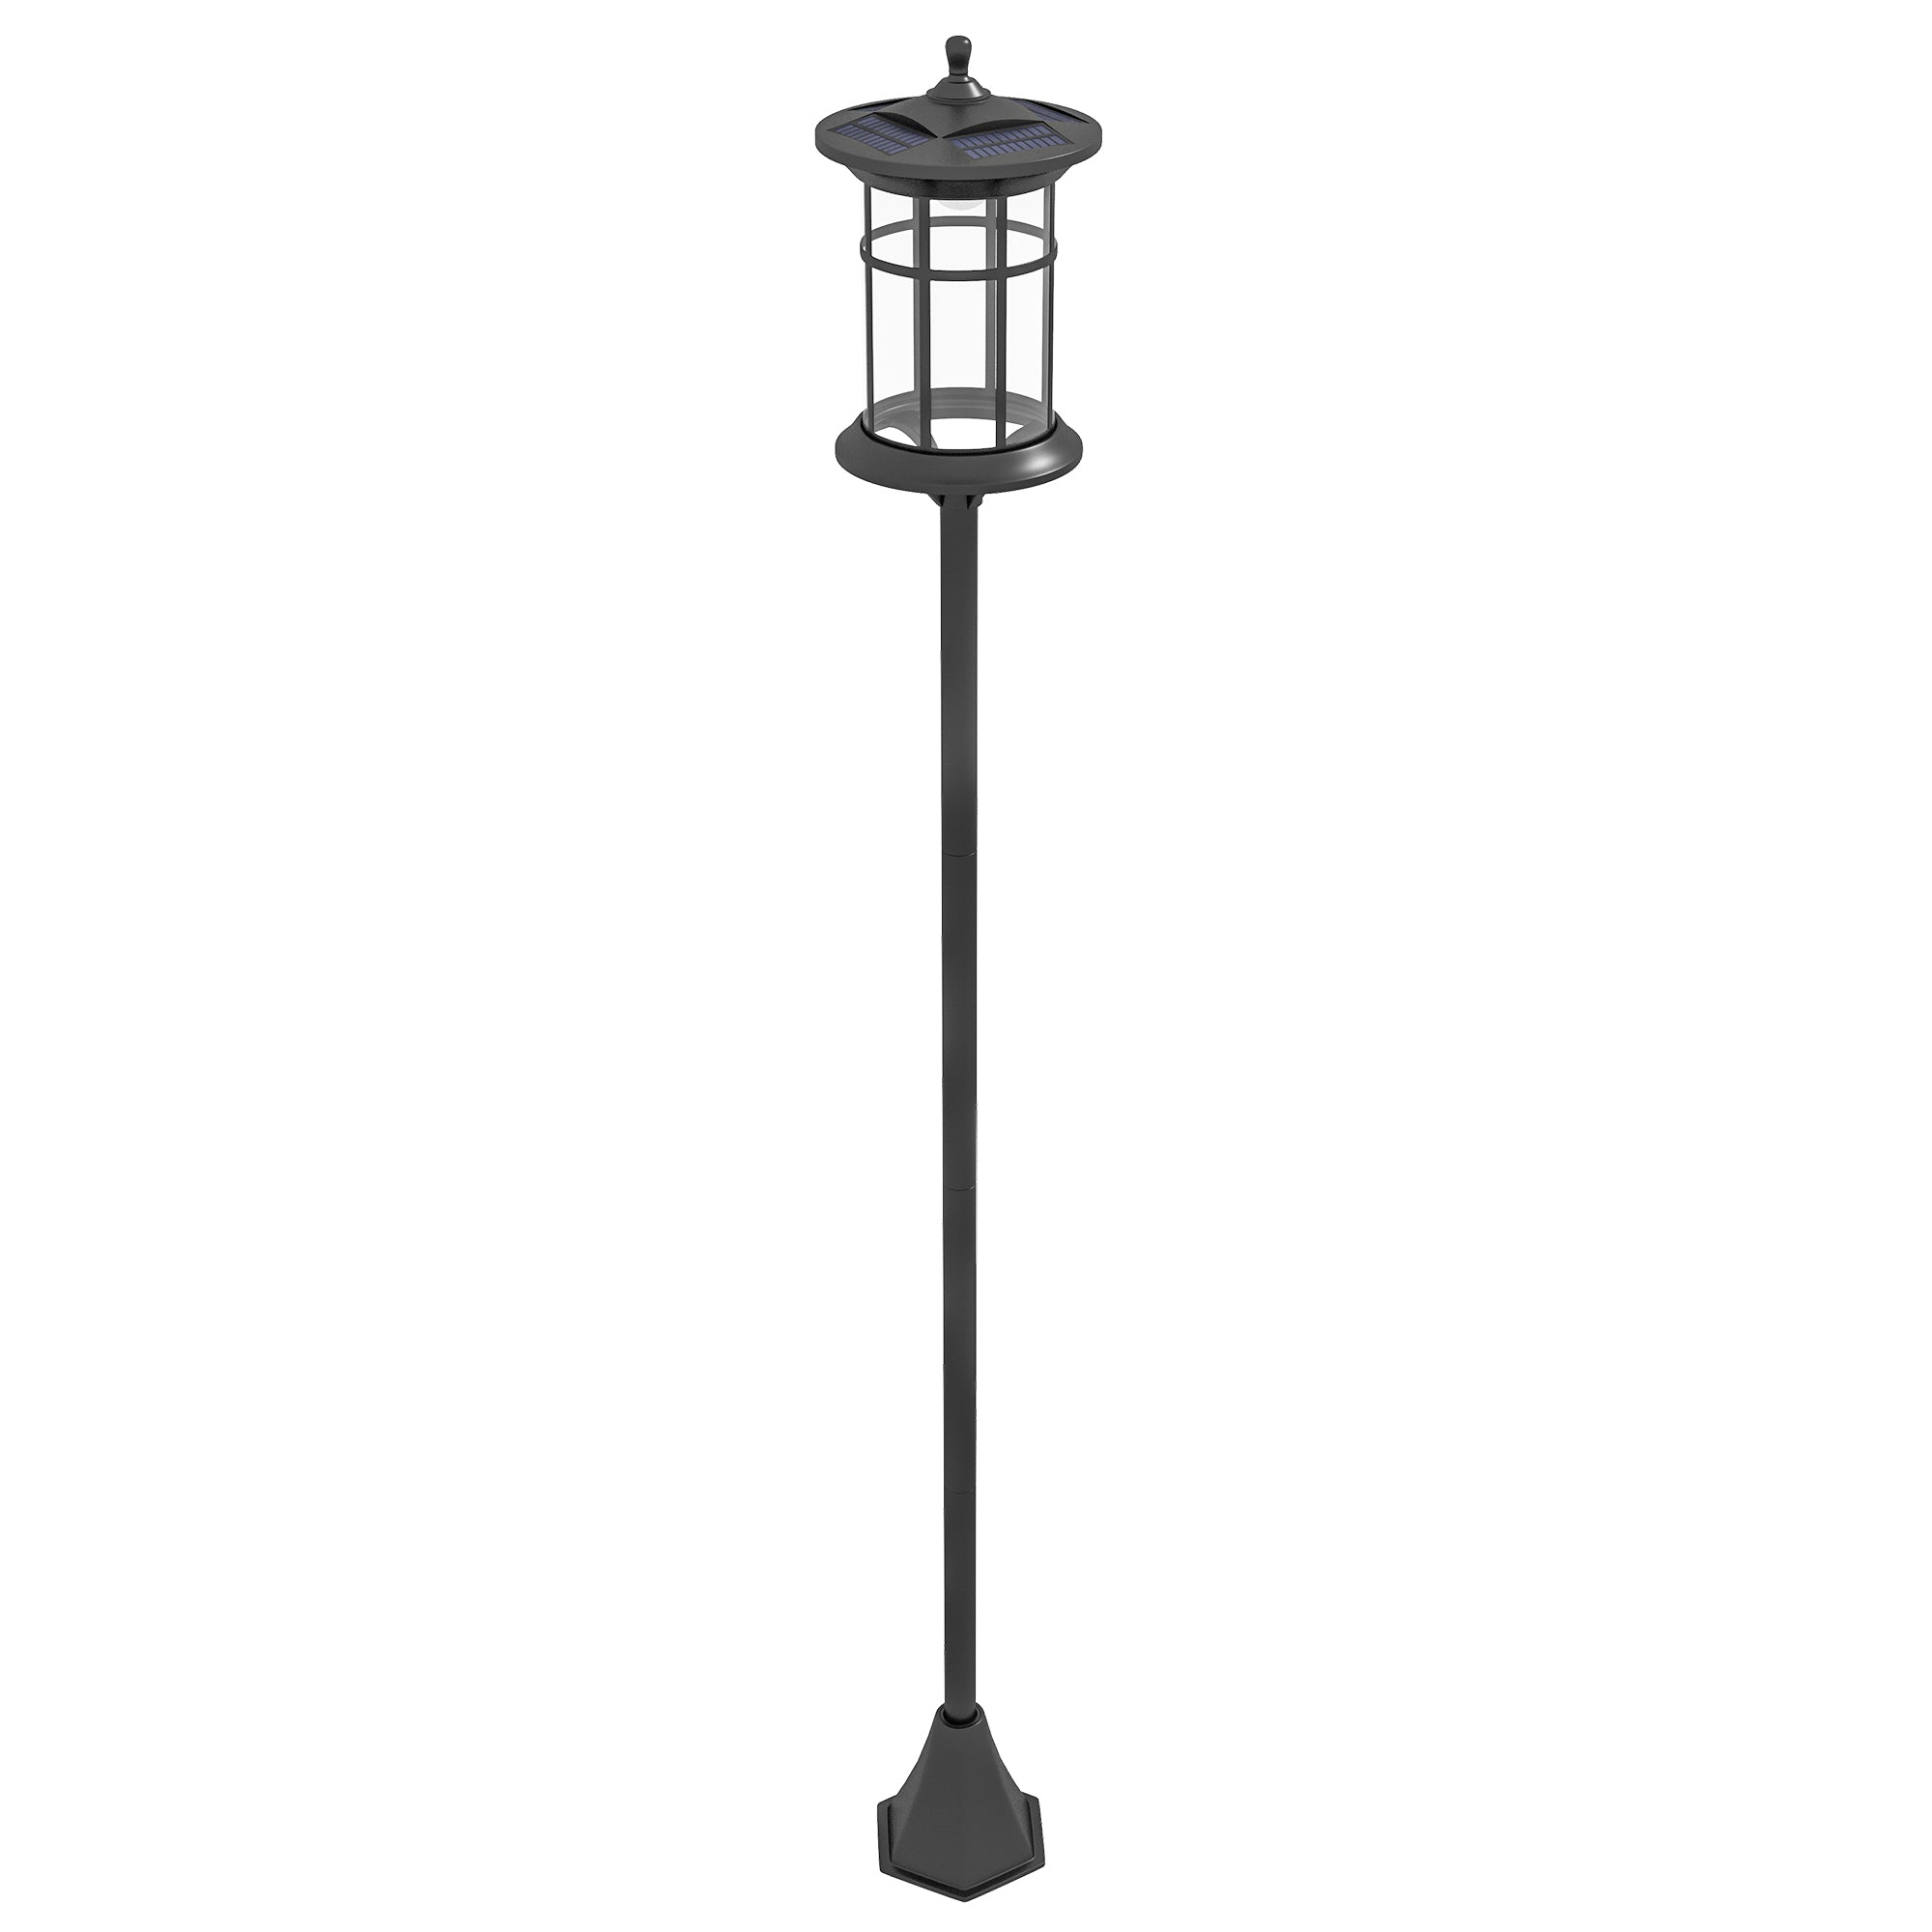 72" Solar Post Light, Cool White LED Outdoor Lamp, Waterproof IP44 for Patio, Garden, Backyard, Pathway - Gallery Canada